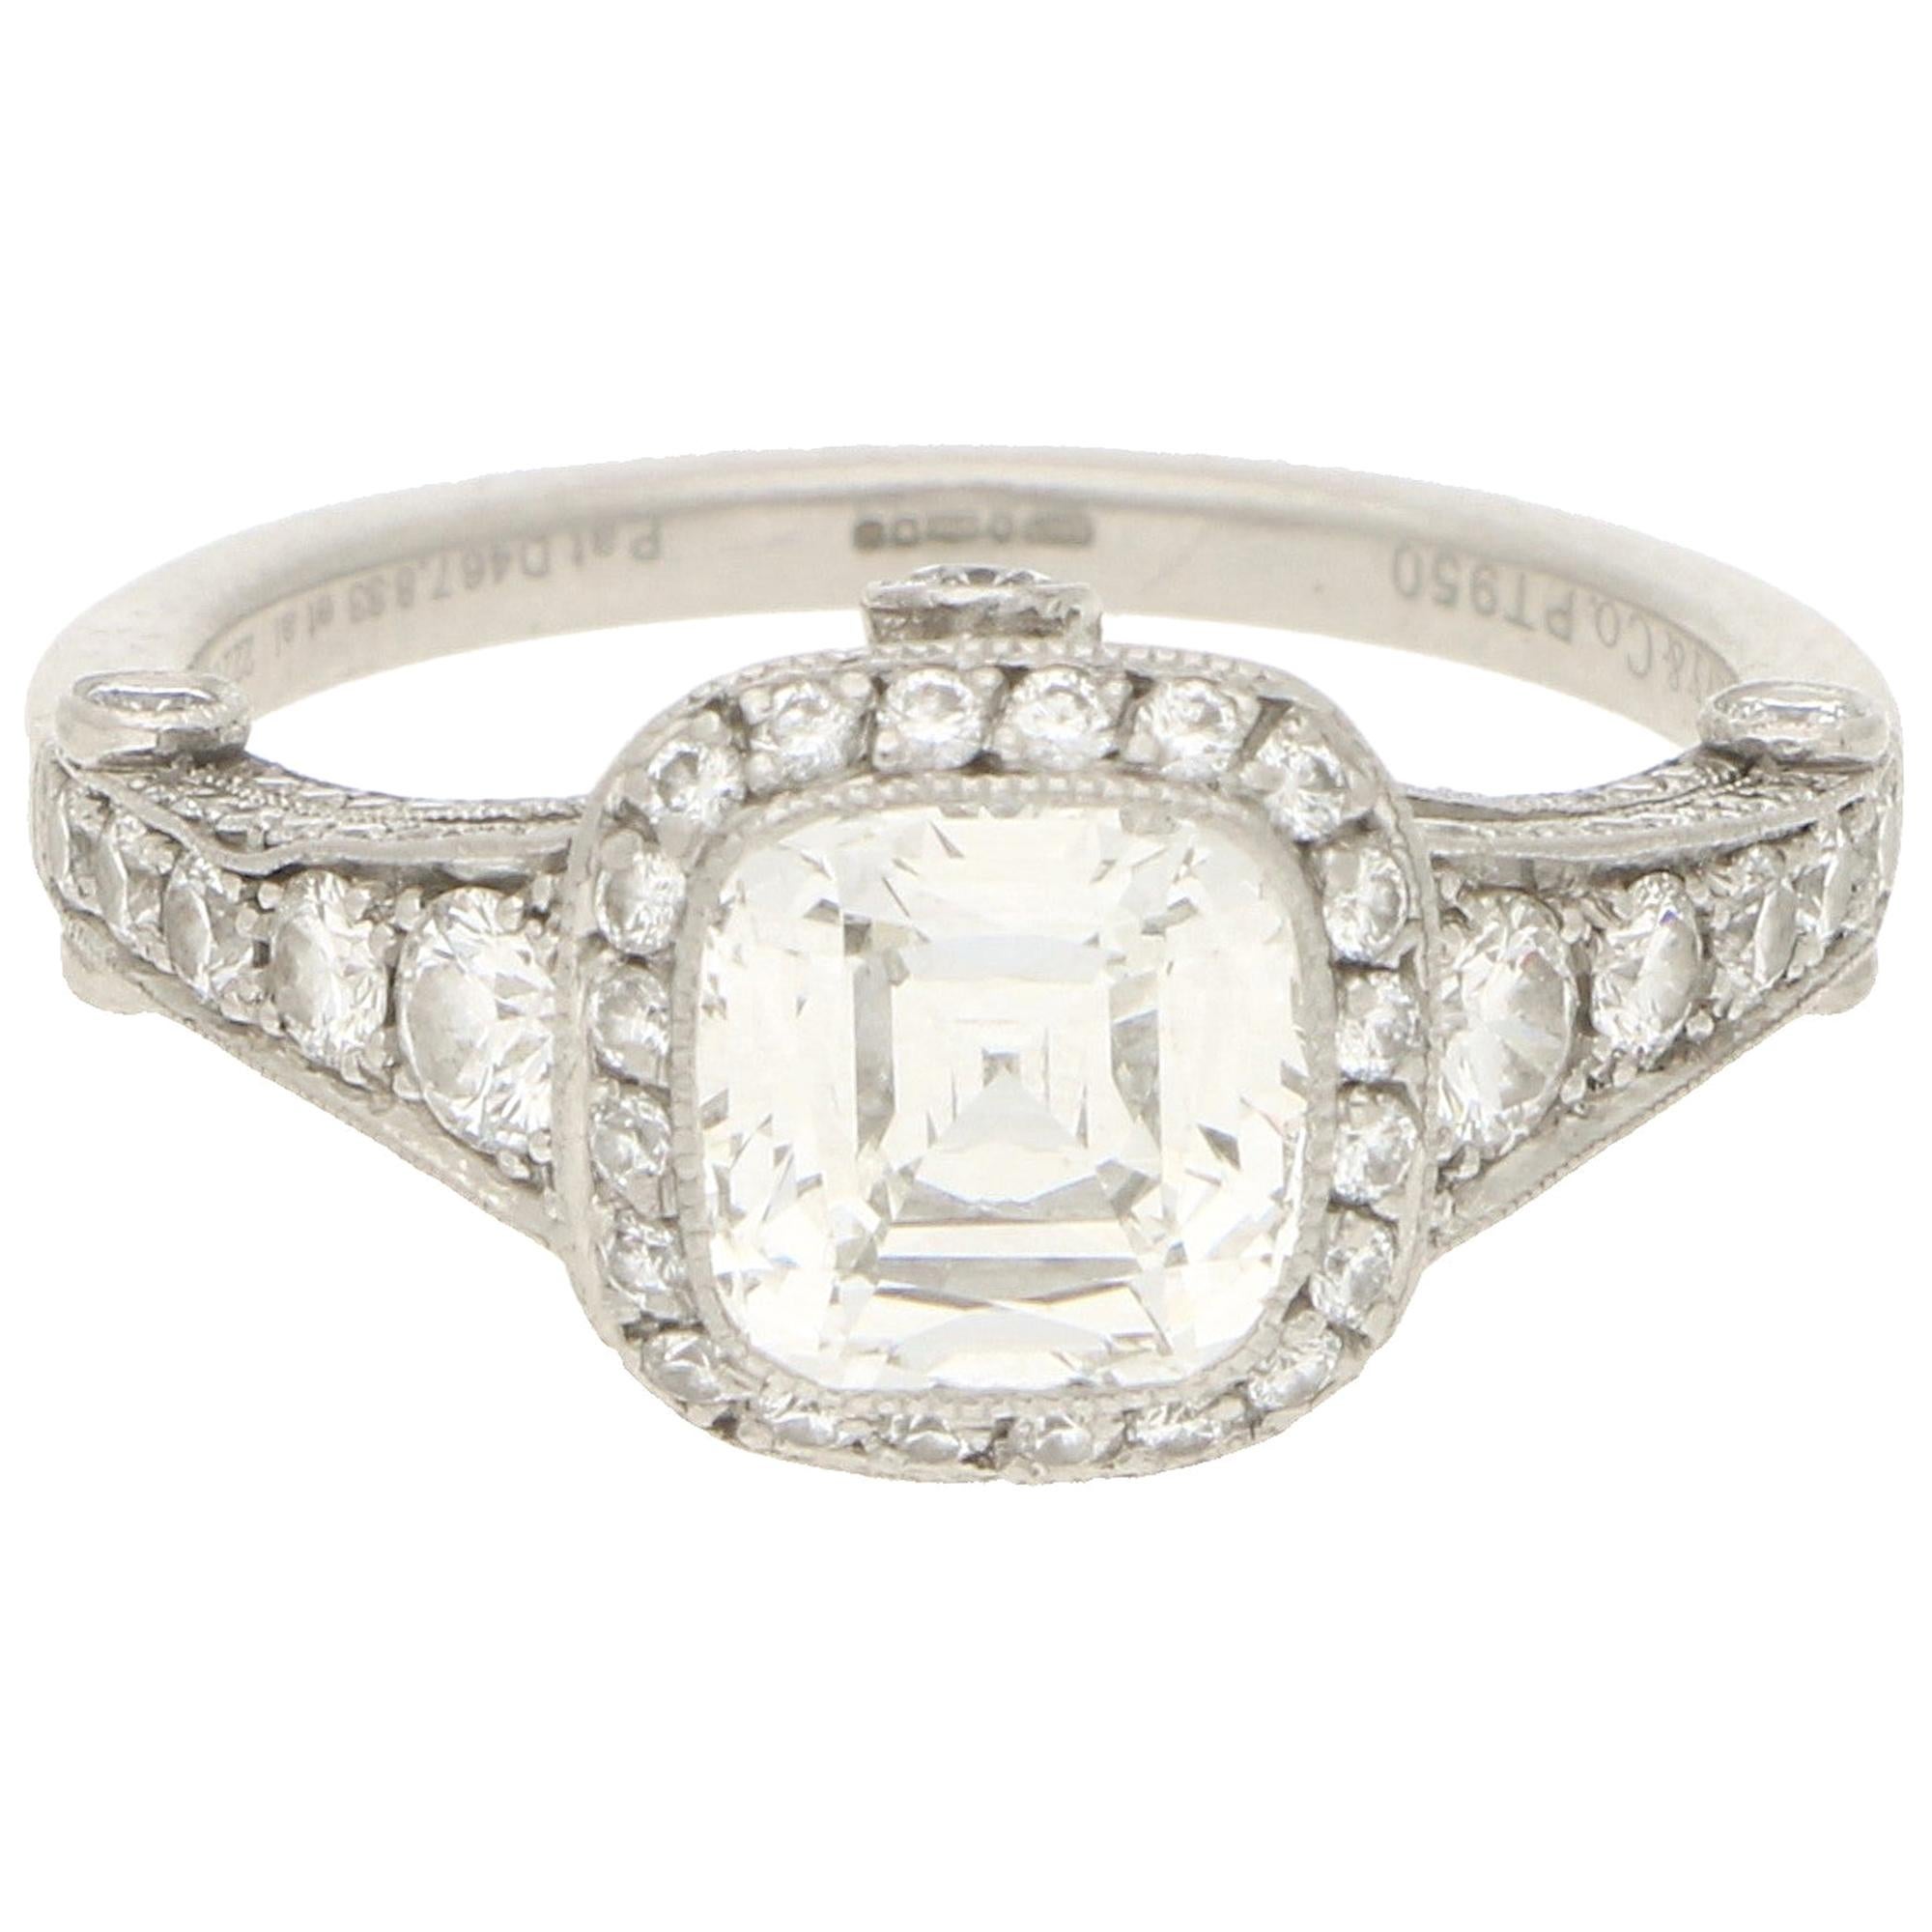 Tiffany & Co. Art Deco Style Legacy Asscher Diamond Engagement Ring in Platinum